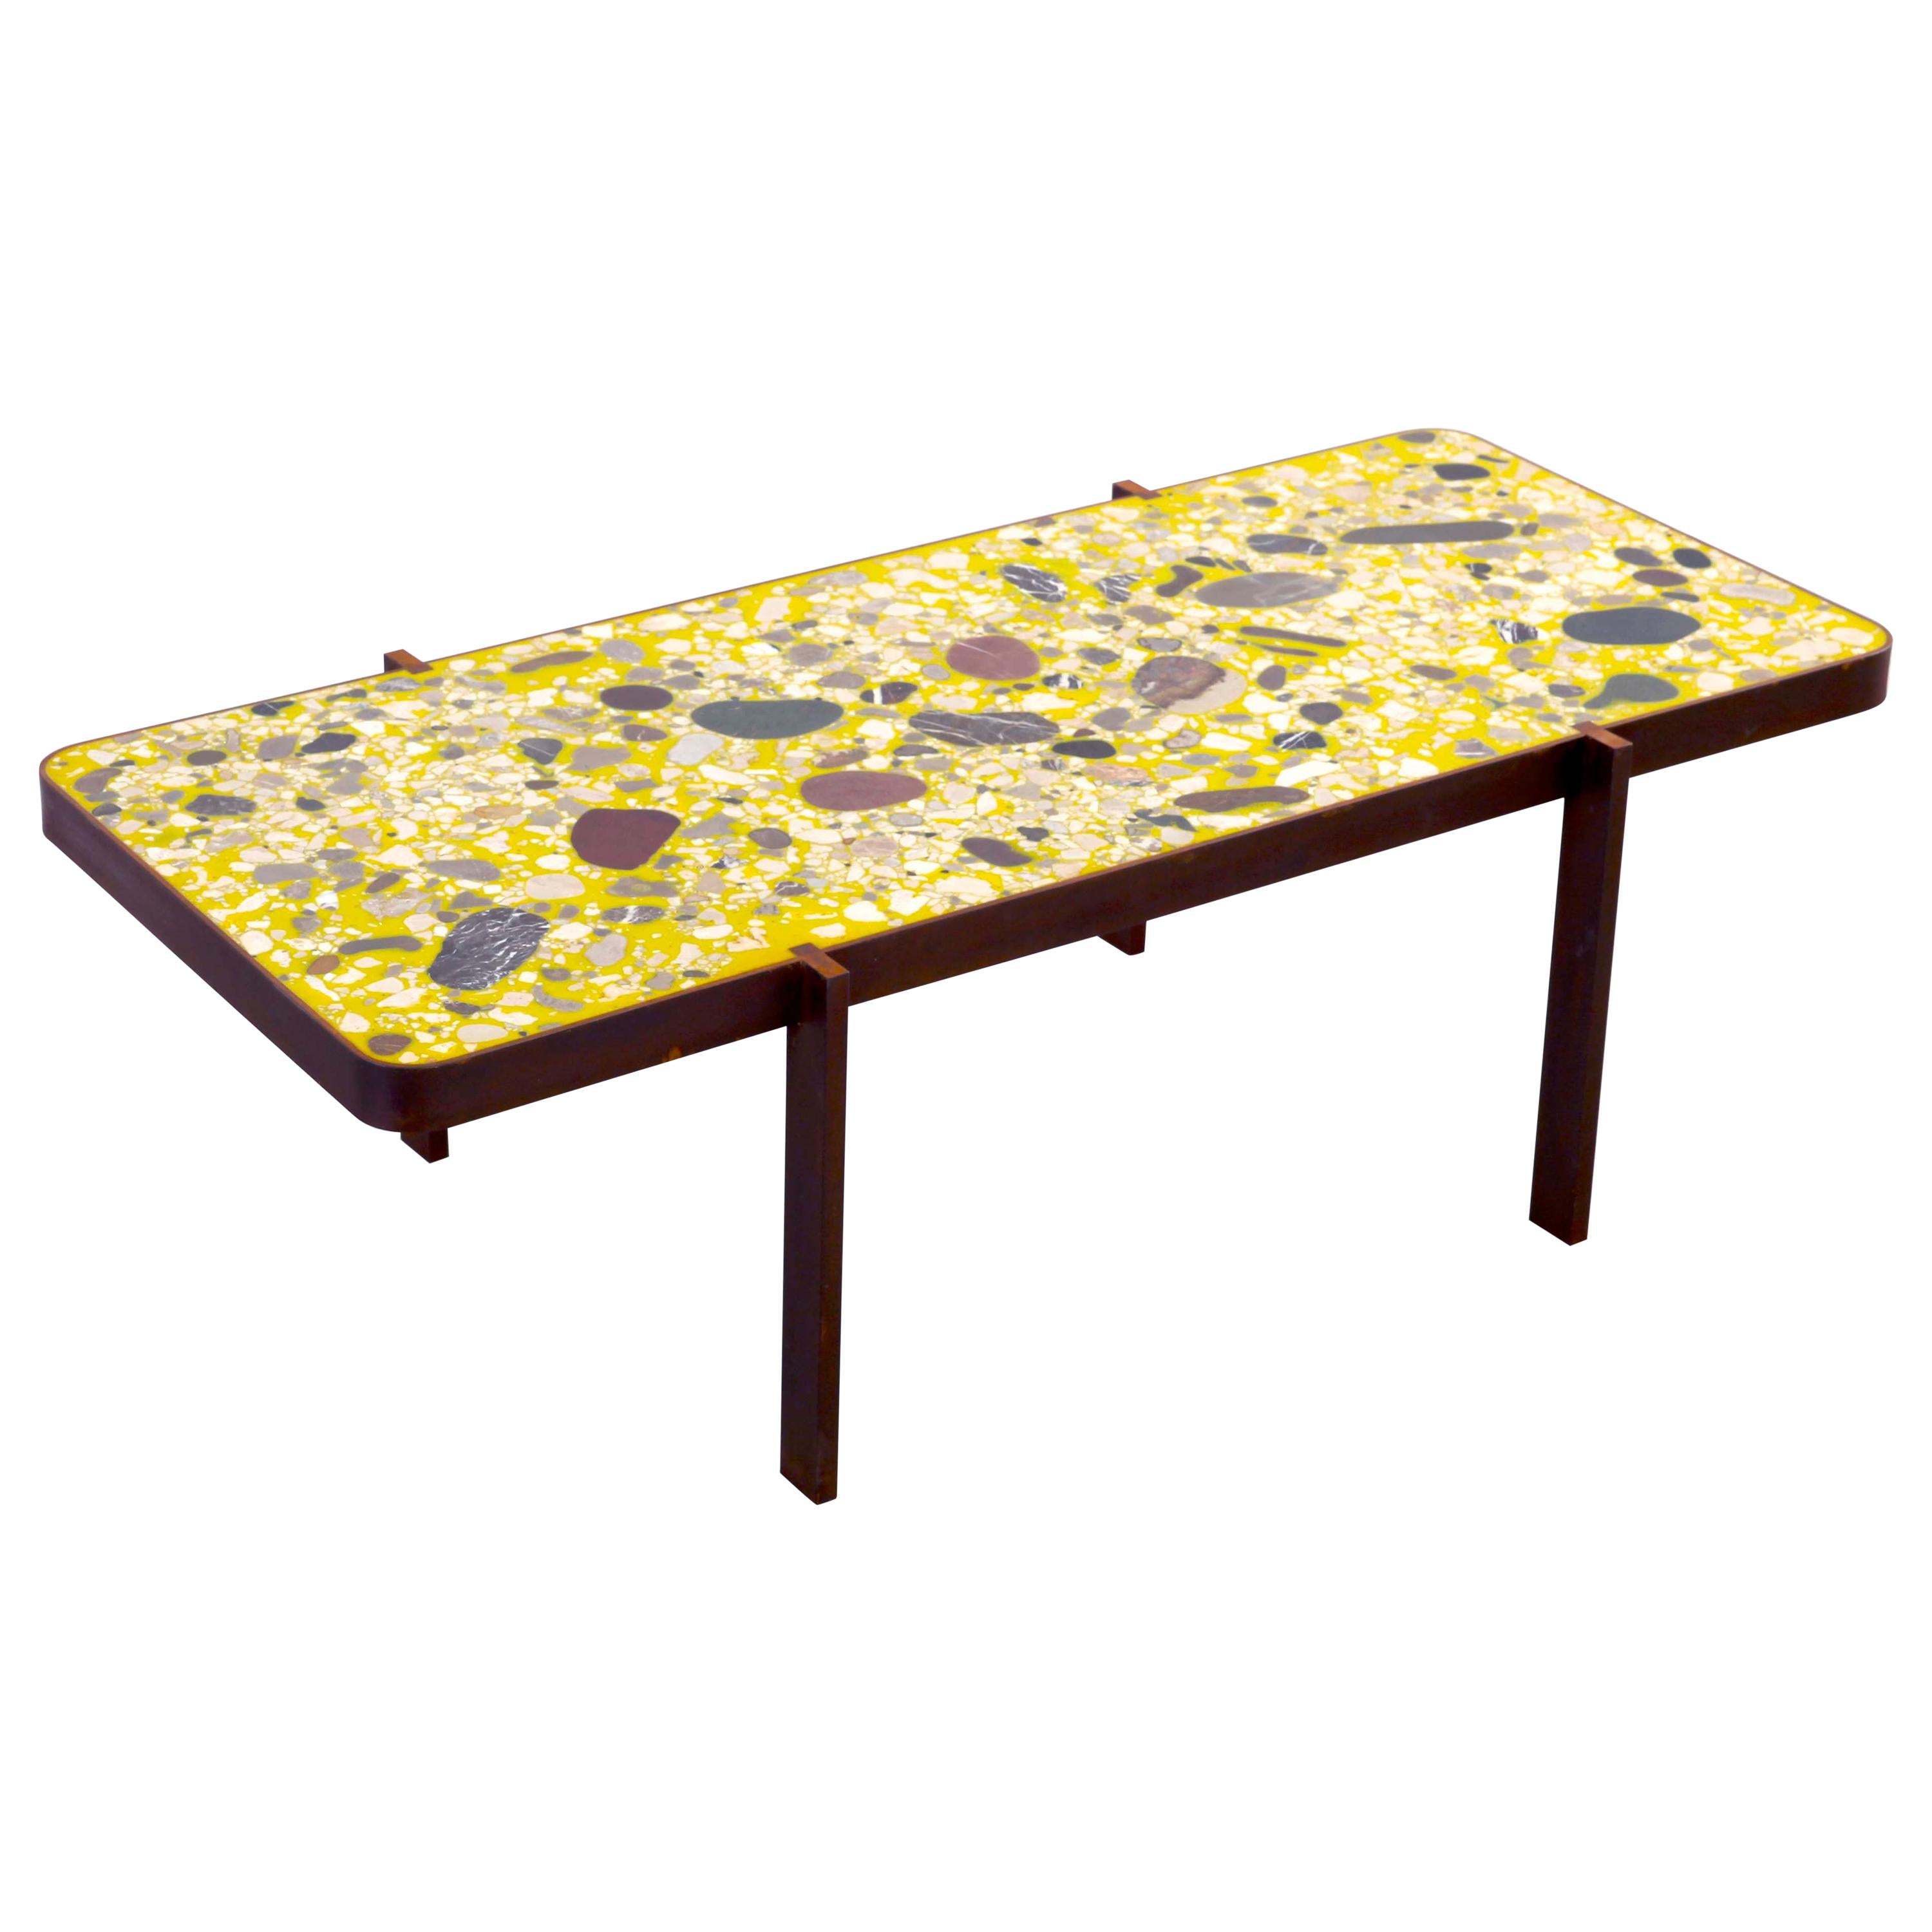 Felix Muhrhofer Contemporary Terrazzo Table with Corroded Steel Construction